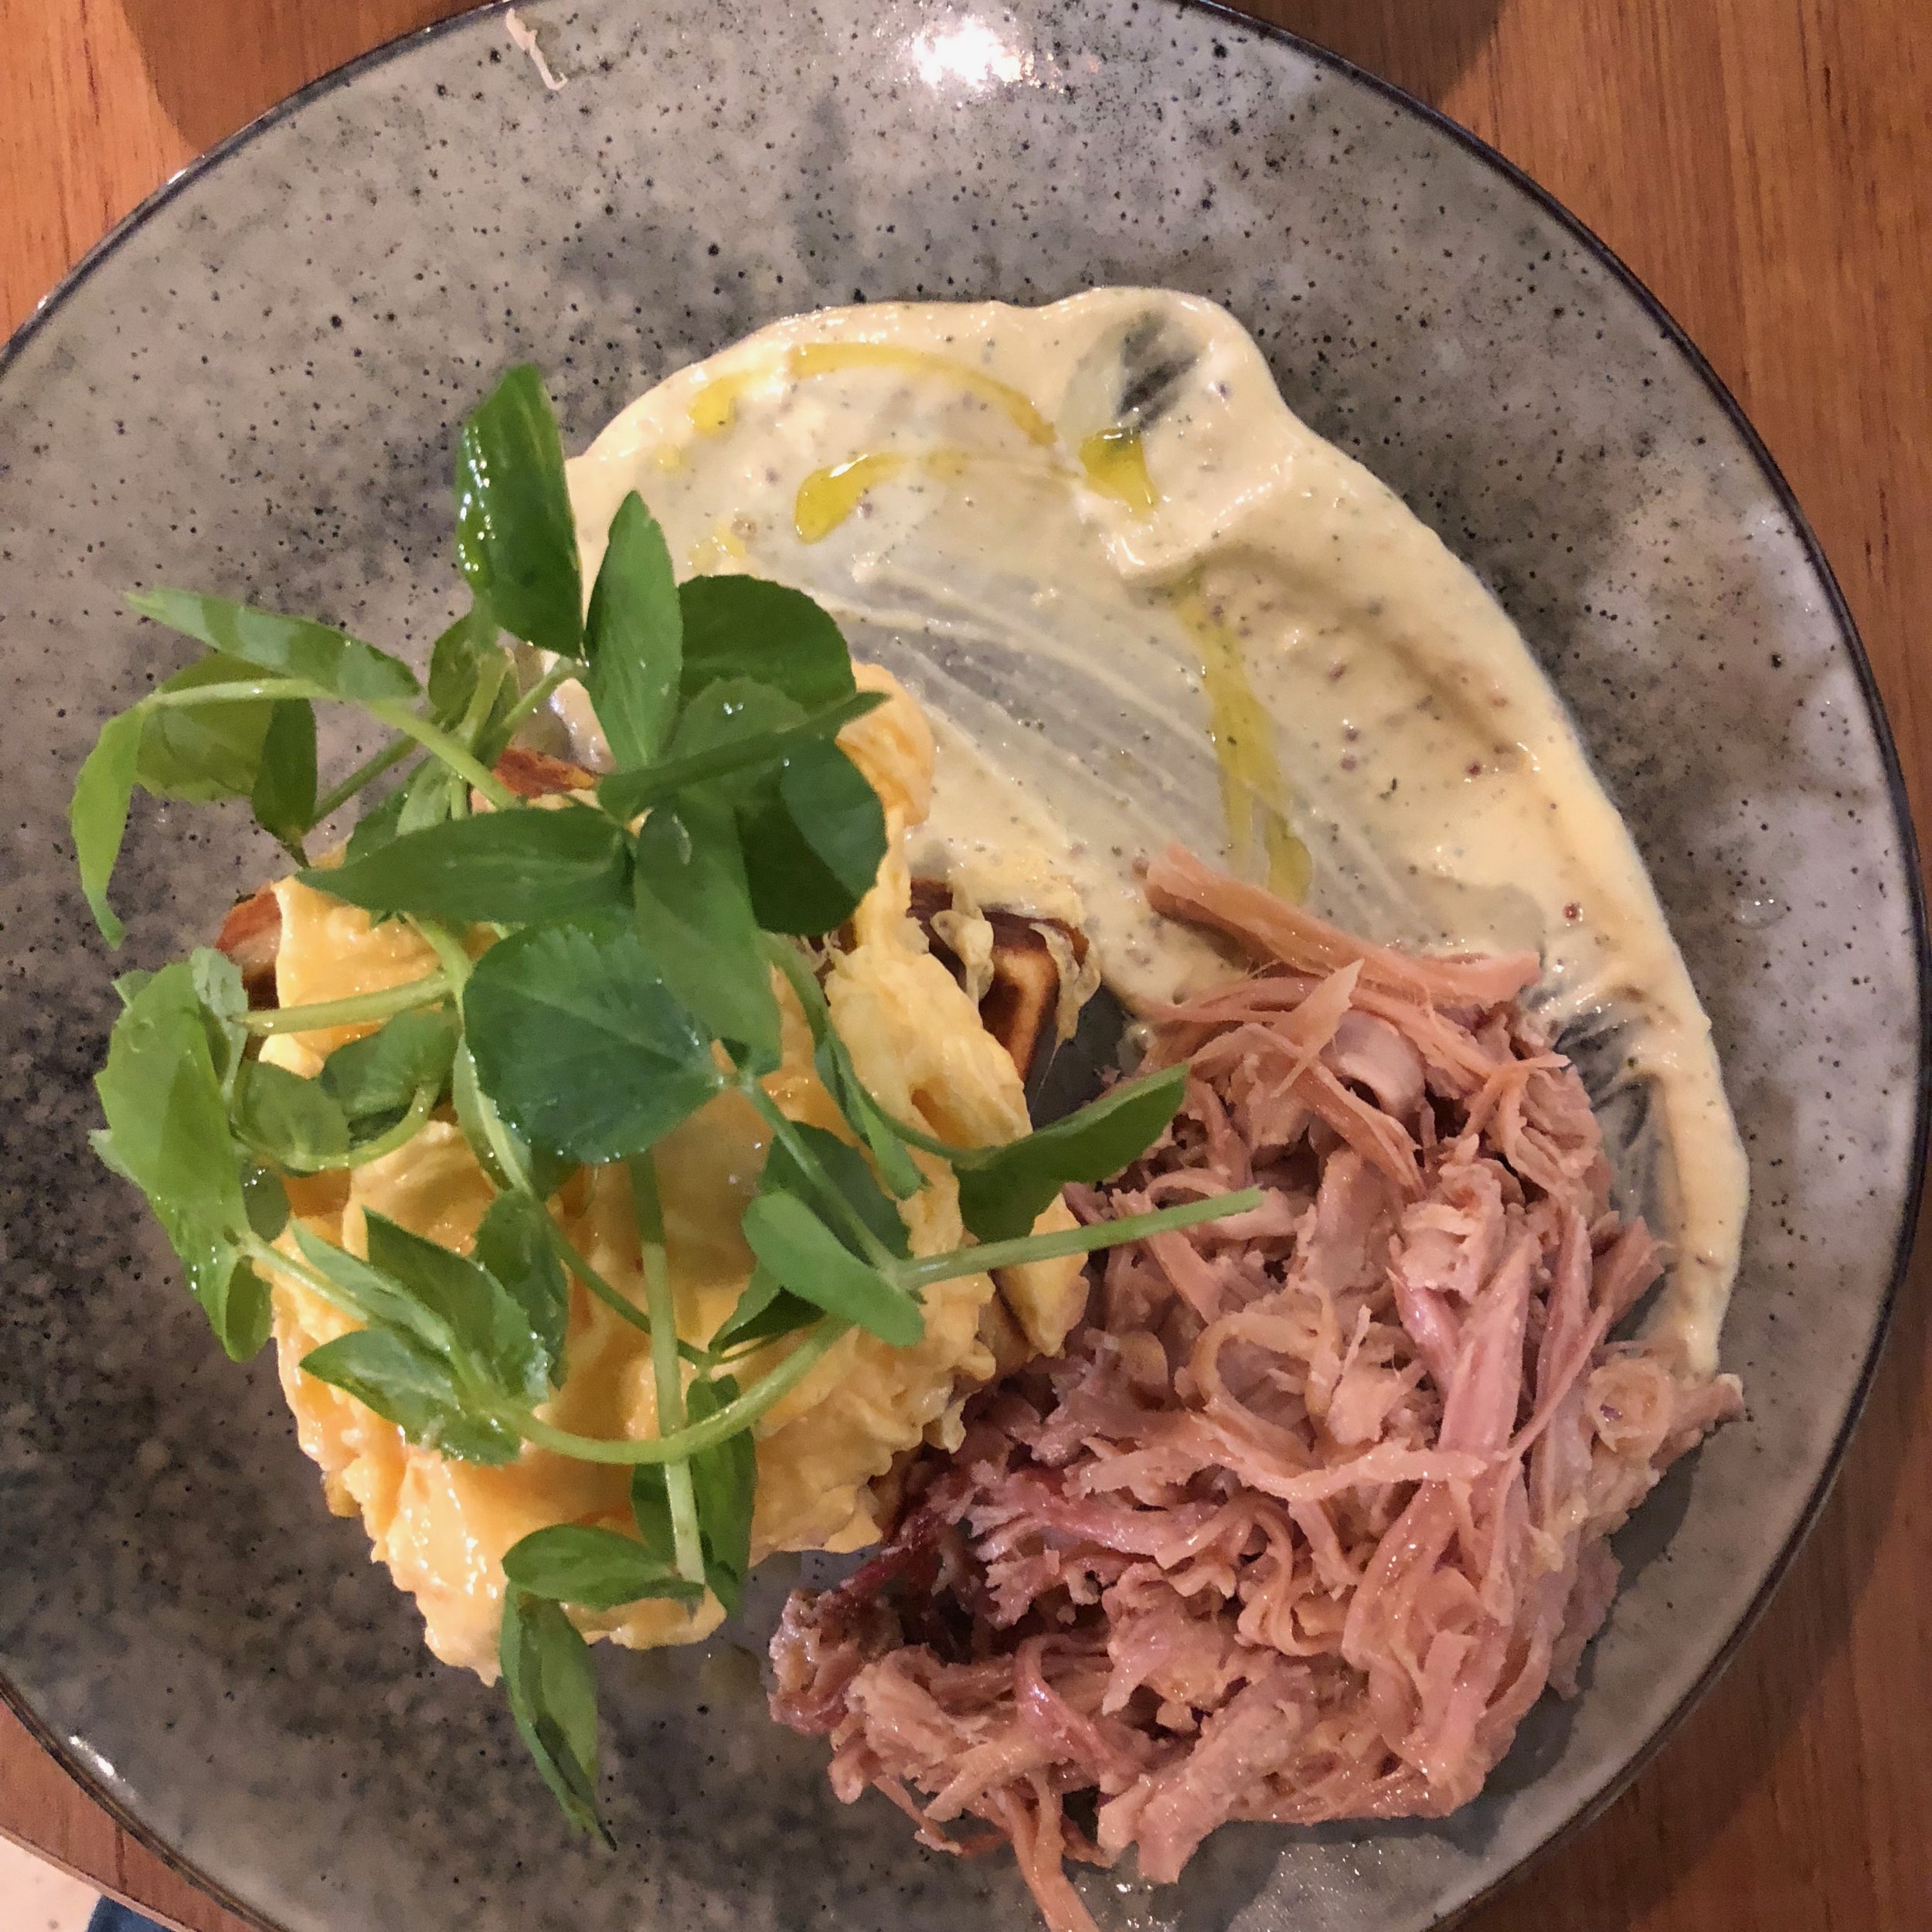 Pulled ham and scrambled eggs